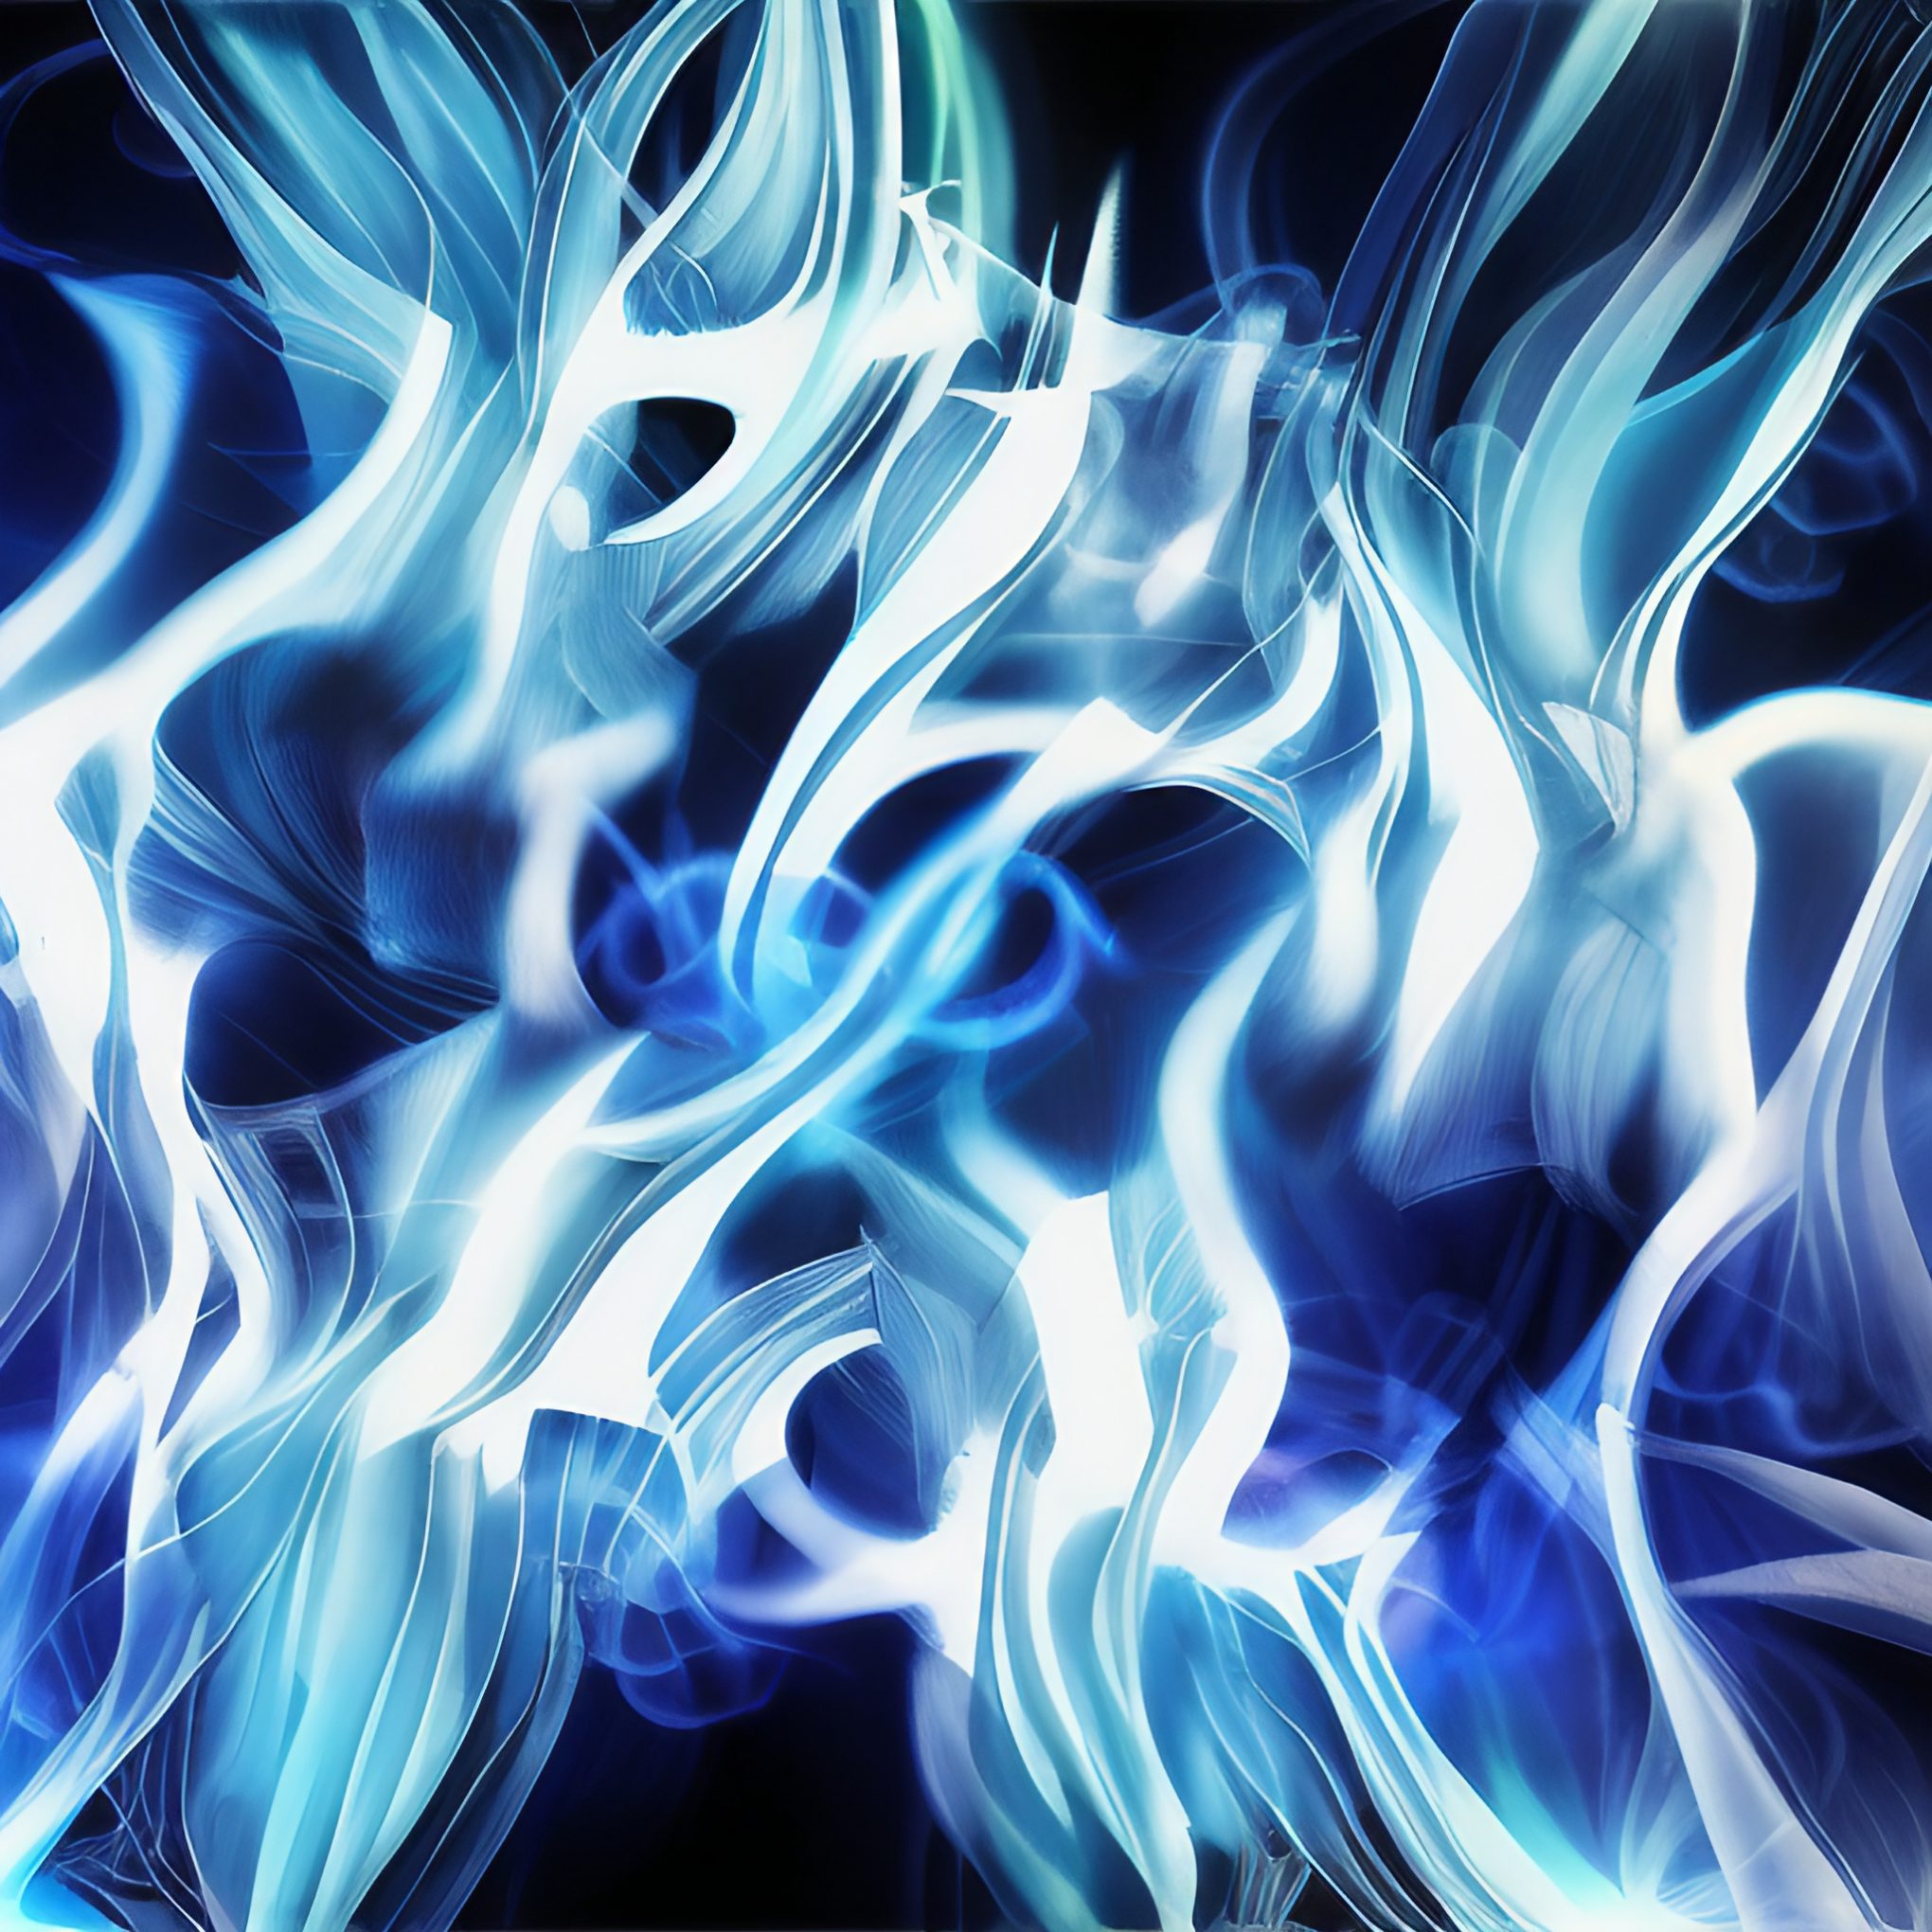 Abstract Blue Glowing Flames Free Graphic